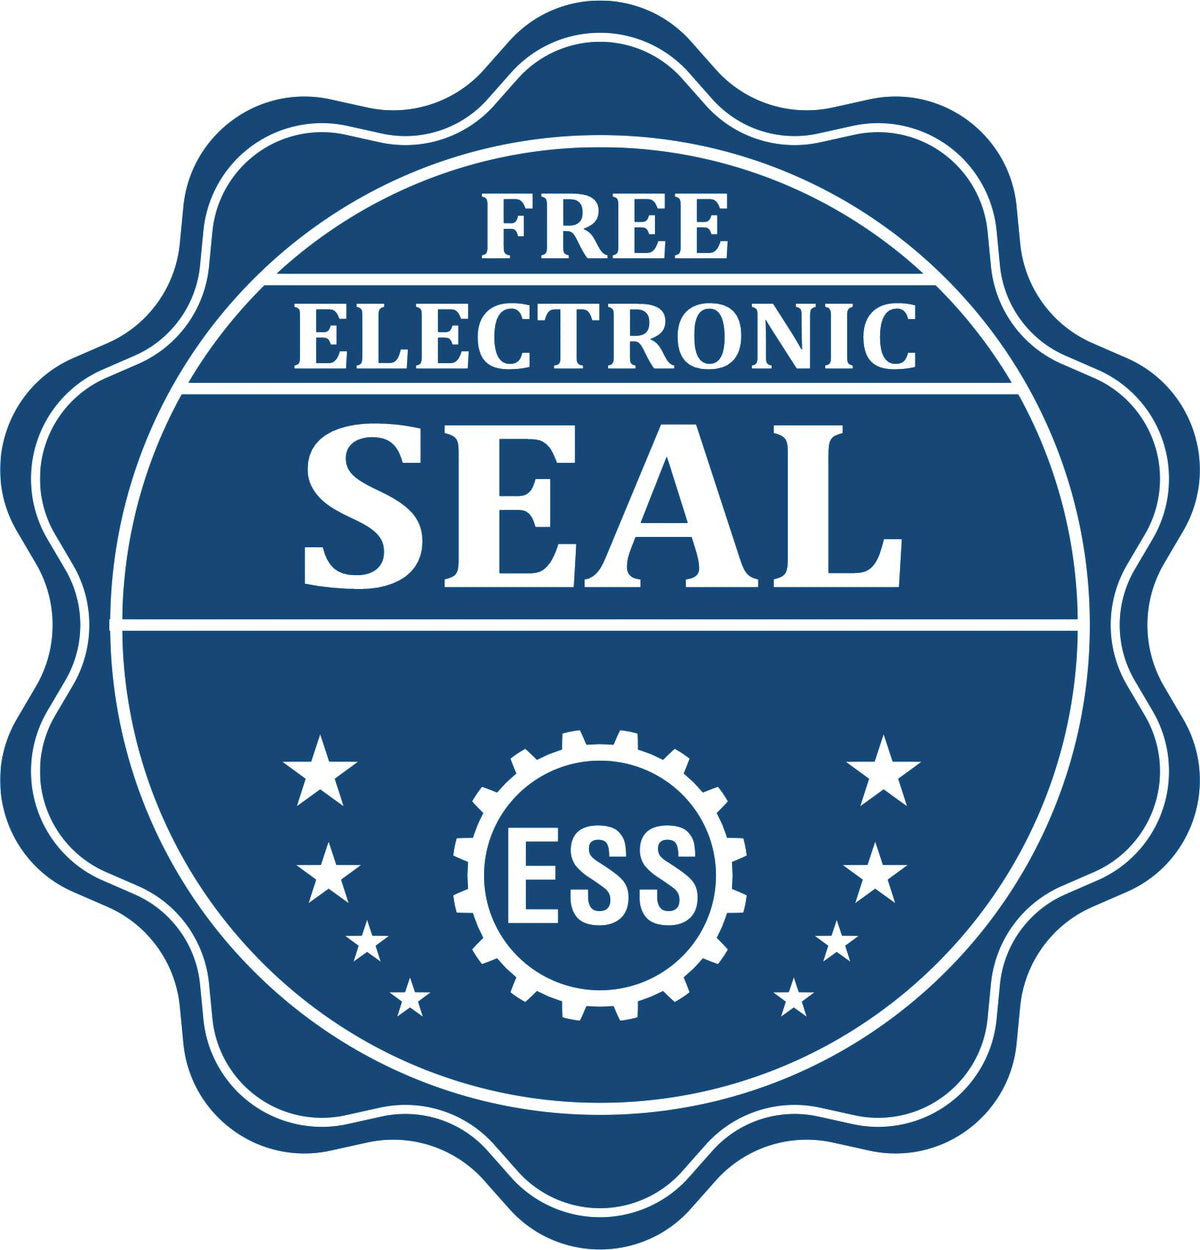 A badge showing a free electronic seal for the Heavy Duty Cast Iron Nevada Land Surveyor Seal Embosser with stars and the ESS gear on the emblem.